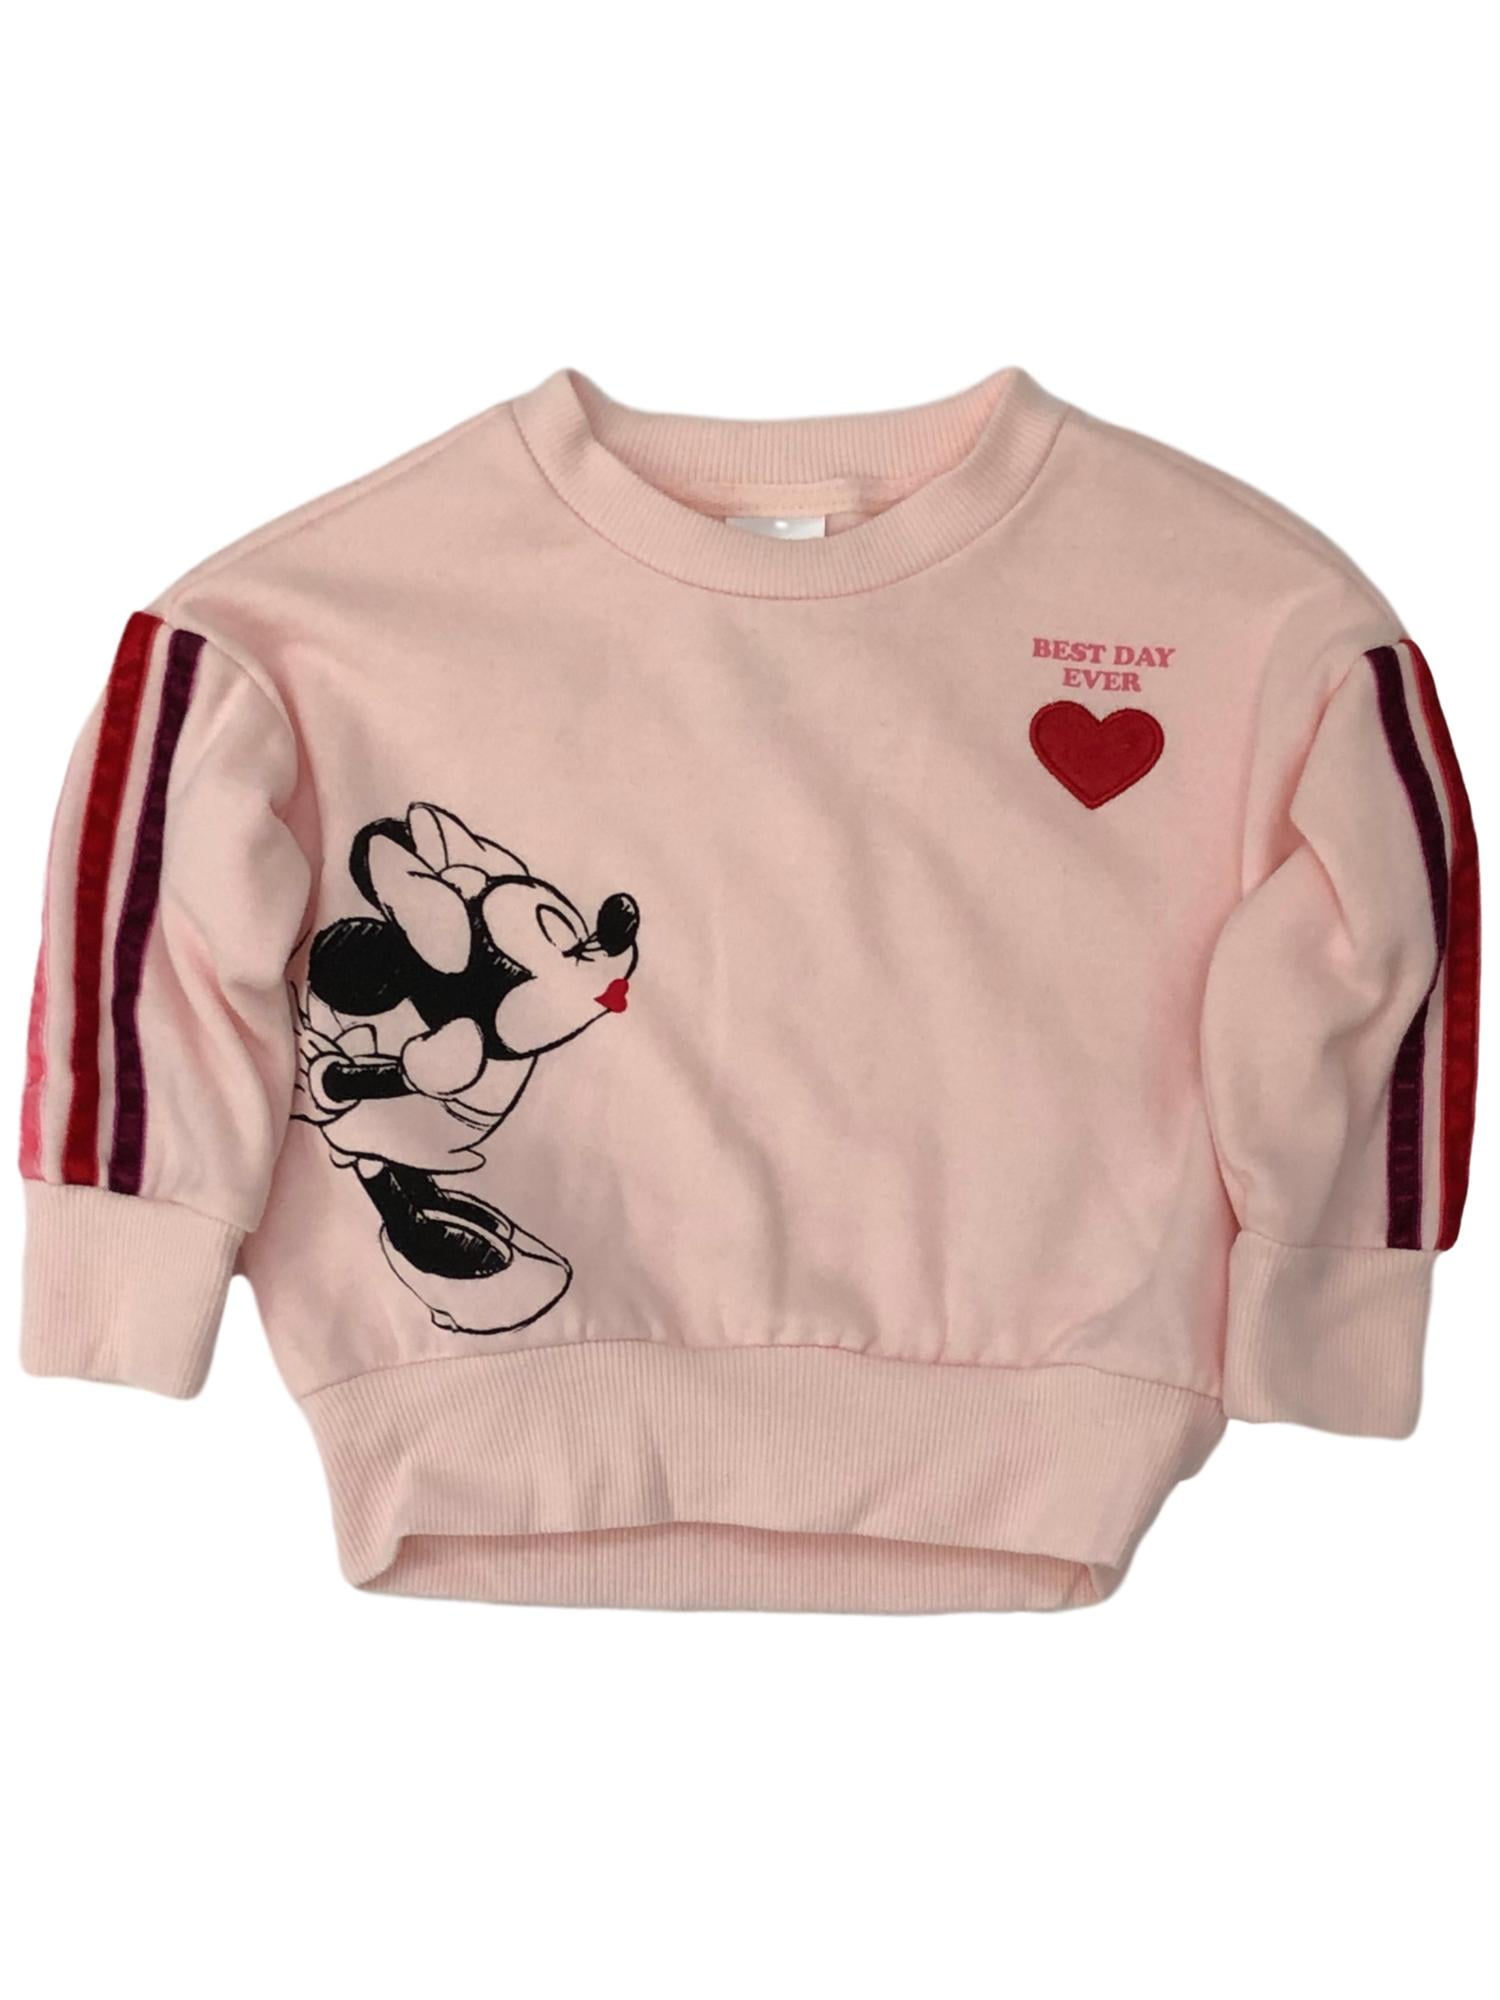 DISNEY Really Cute Fluorescent Pink Minnie Mouse Long Sleeve Top NWT 